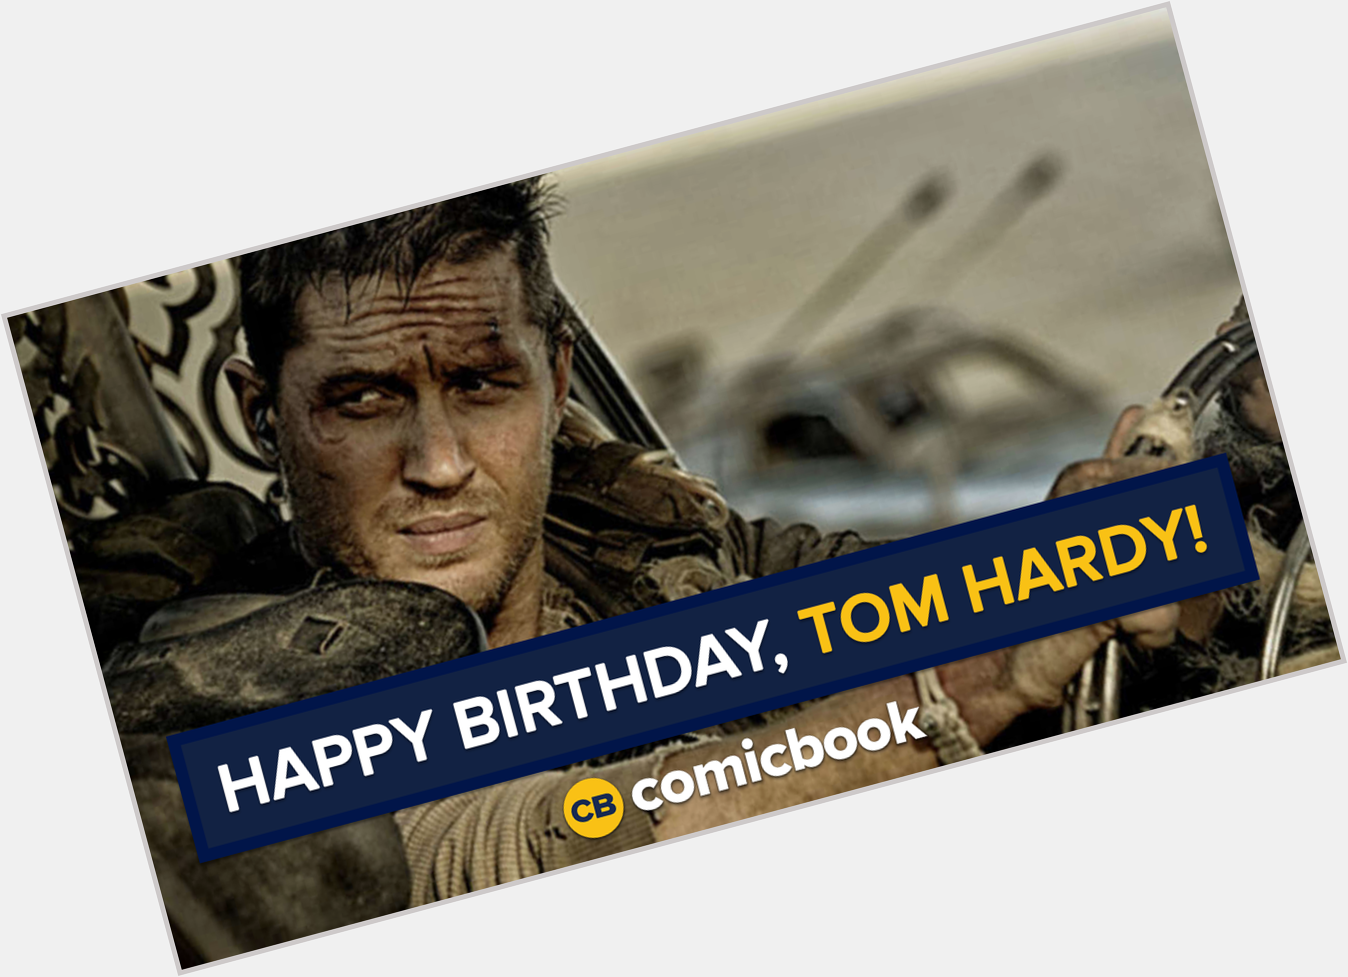 Happy Birthday, Check out some of our favorite Tom Hardy scenes! 